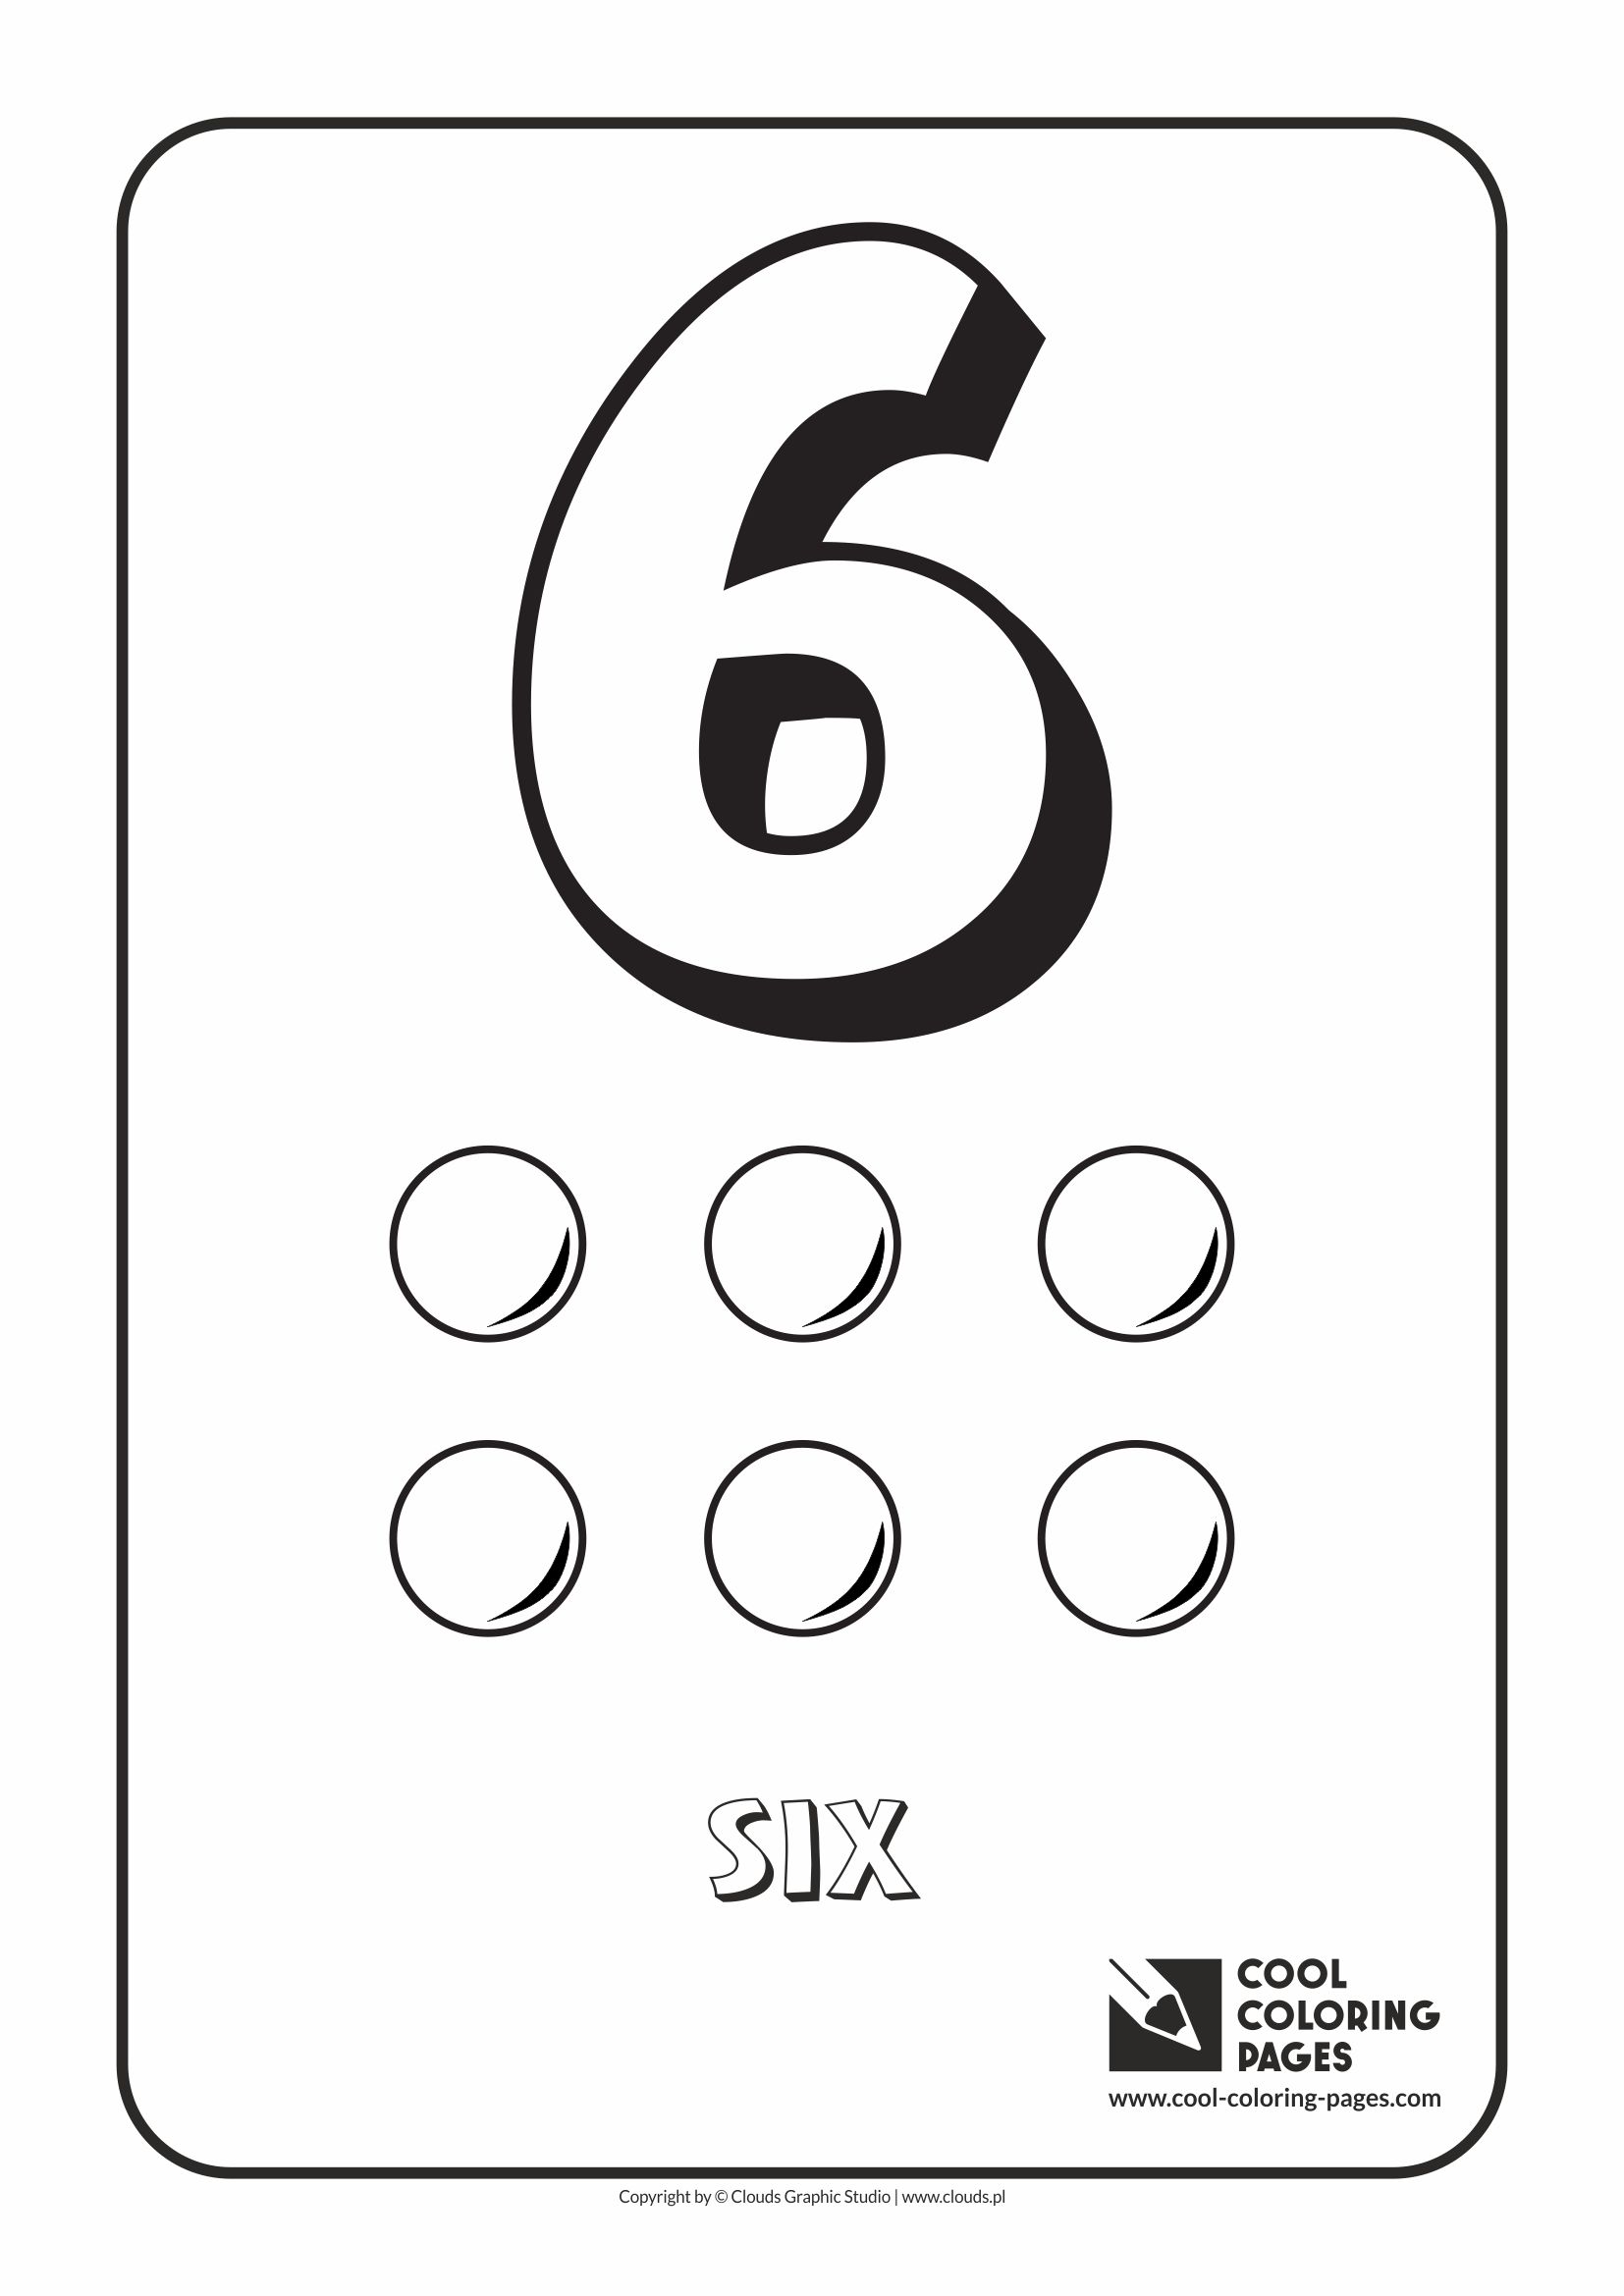 Cool Coloring Pages - Digits / Digit 6 / Coloring page with digit 6